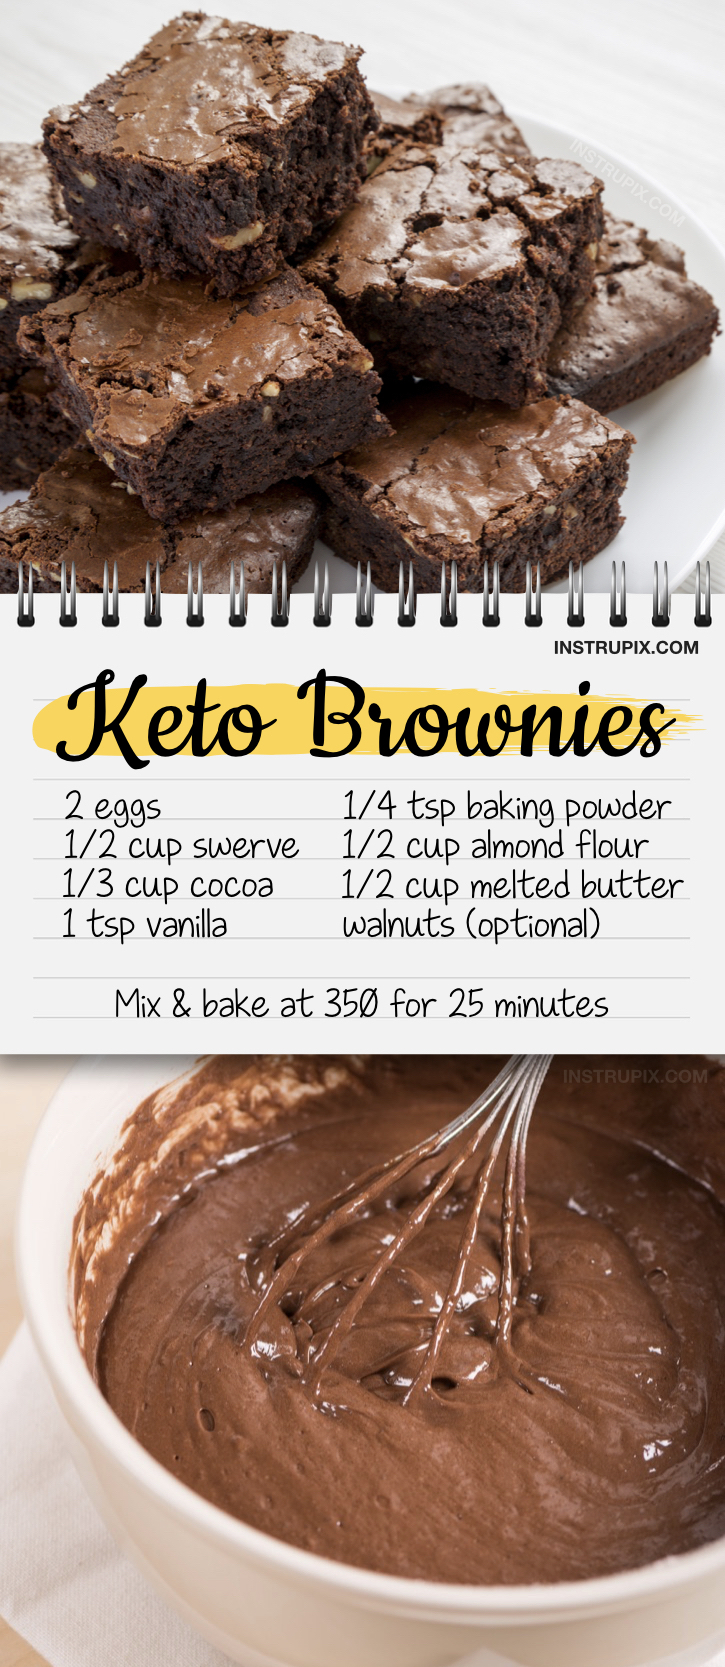 Looking for quick and easy keto chocolate dessert recipes? These homemade keto brownies are simple to make with almond flour and swerve! If you are on a ketogenic diet, this brownie recipe is the perfect craving crusher! They are super moist and delicious. Atkins and diabetic friendly. #keto #lowcarb